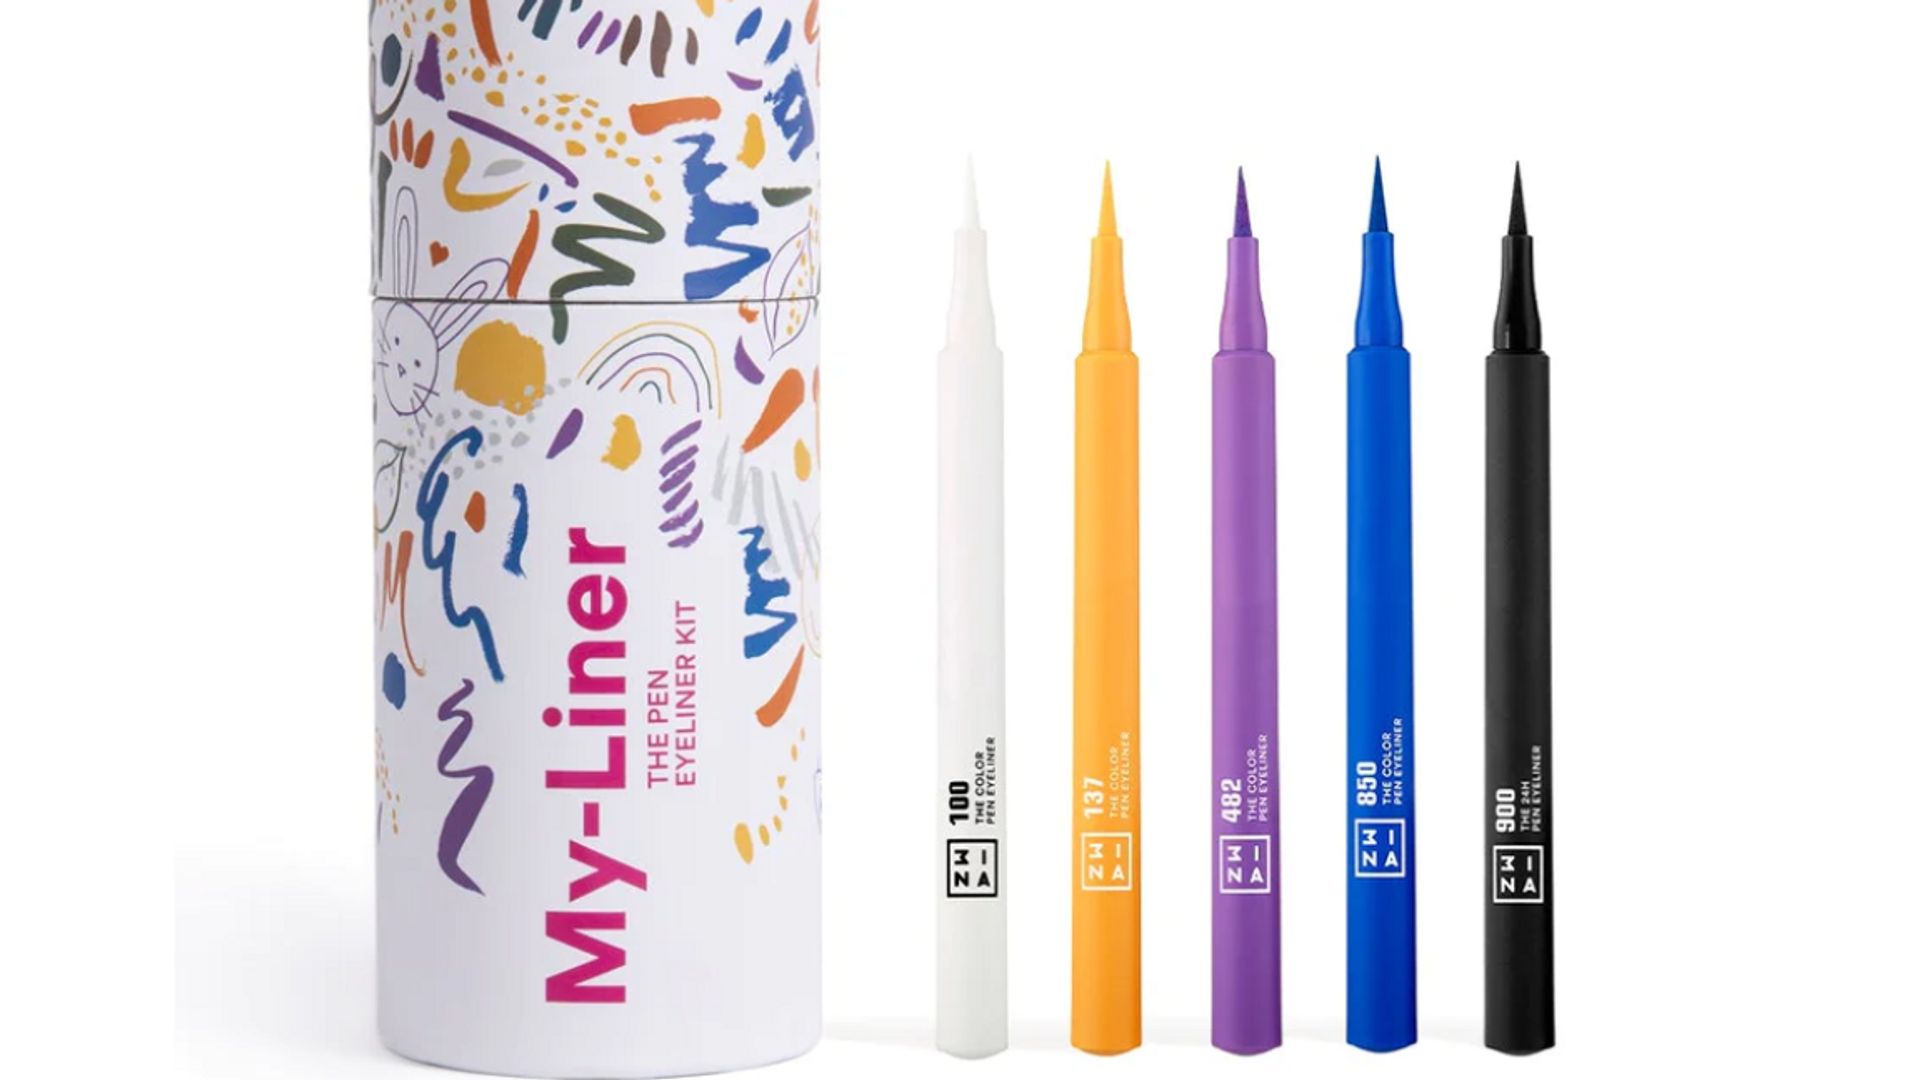 Eyeliner kit with white, yellow, purple, blue and black pens 